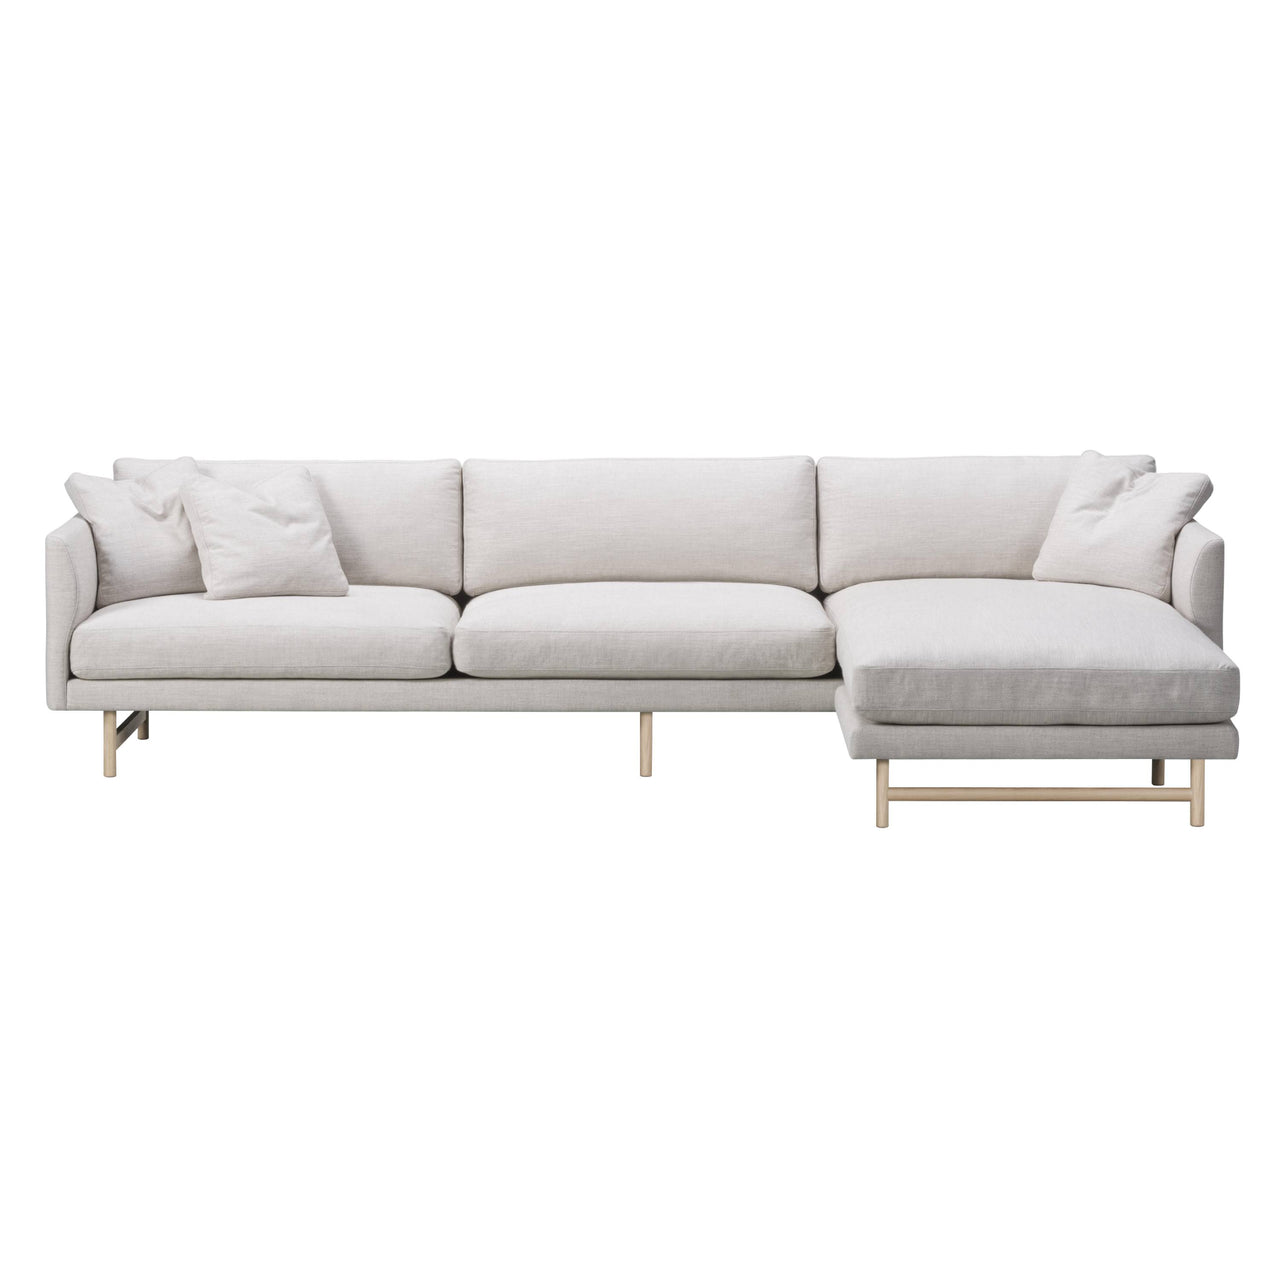 Calmo 3 Seater Chaise: Wood Base + Large - 116.1